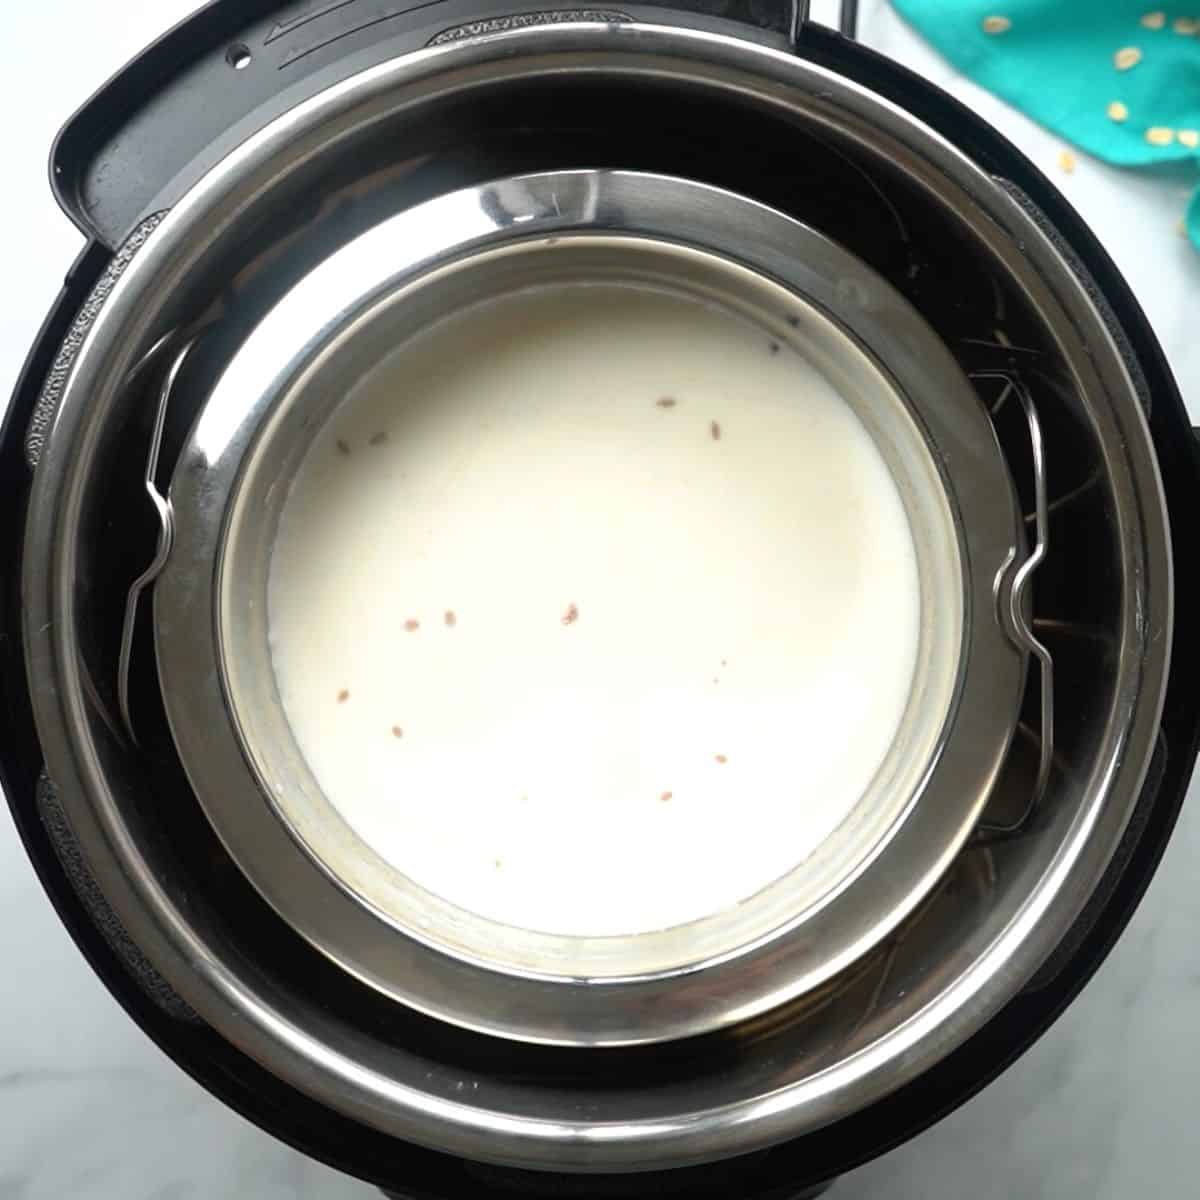 Stainless steel bowl with milk and oats inside inner pot of instant pot.